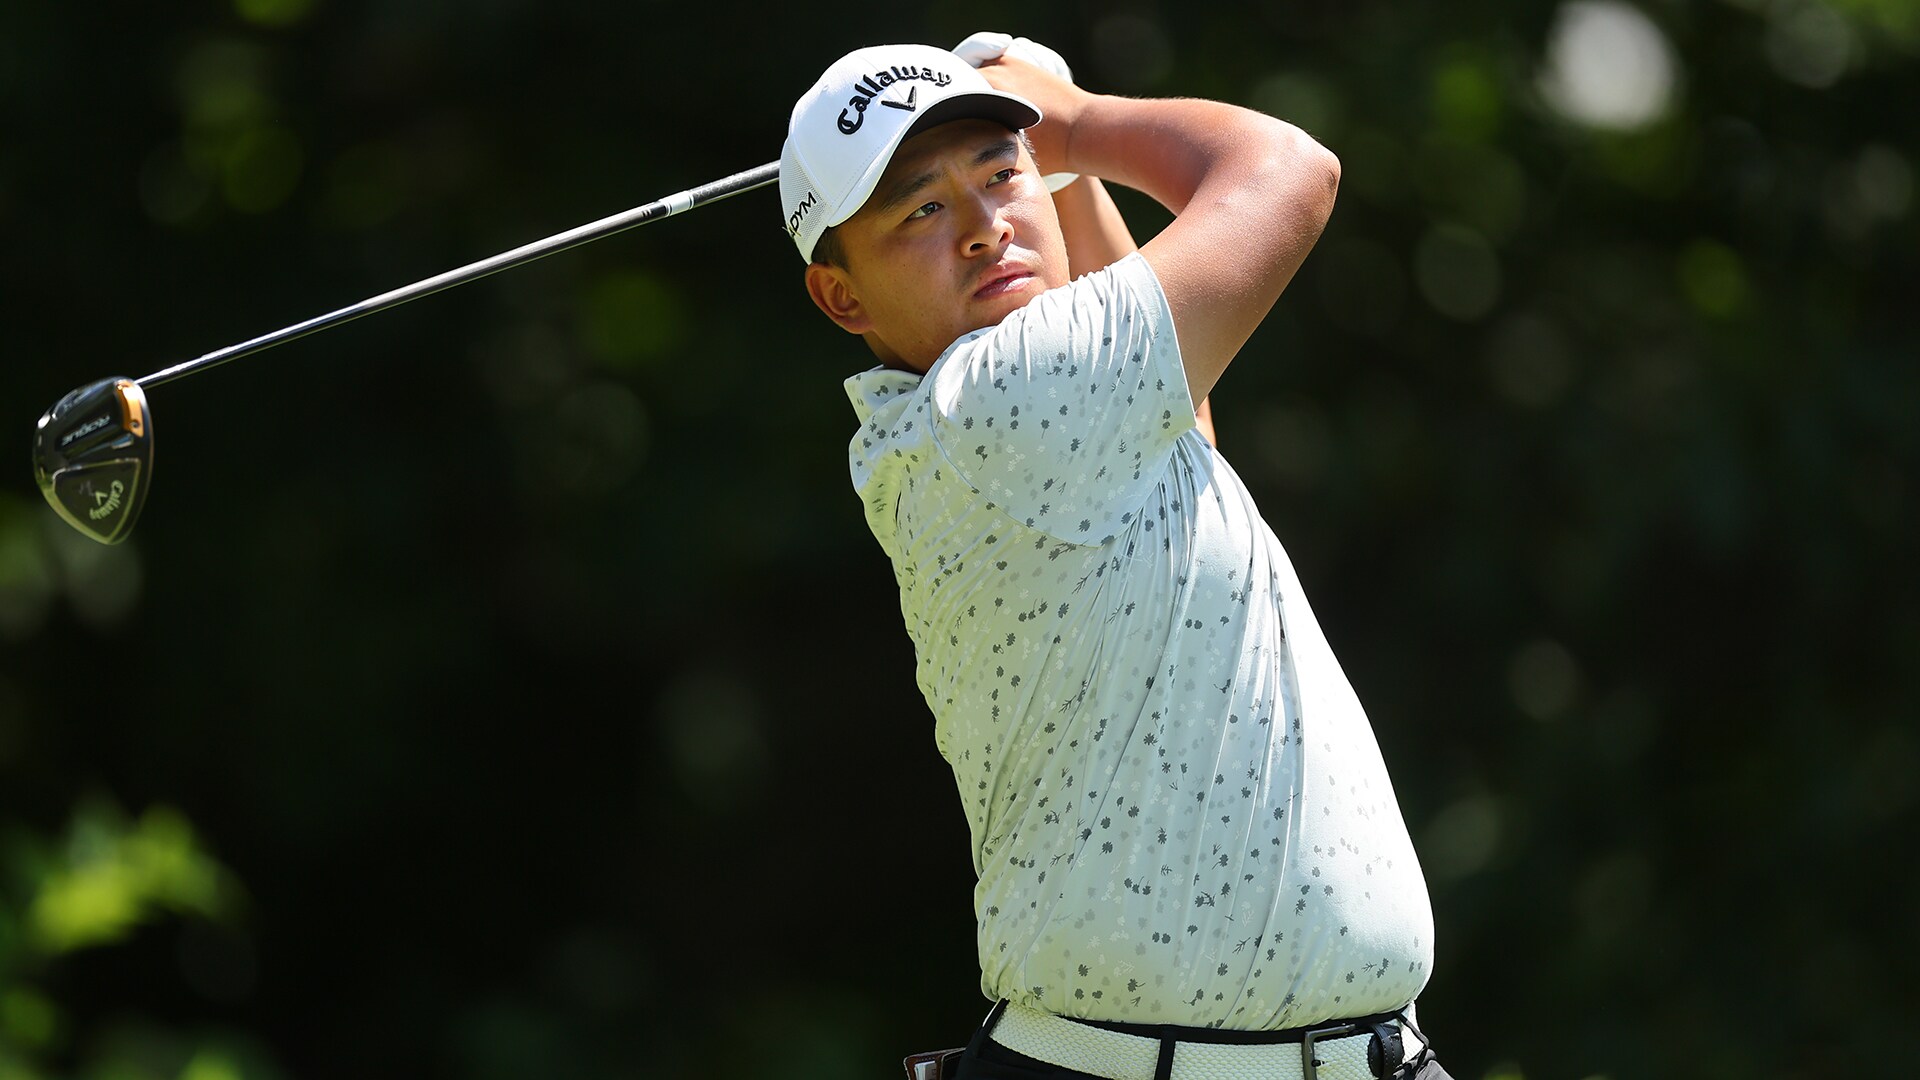 Kevin Yu back in playoff hunt after first top-10 since knee surgery